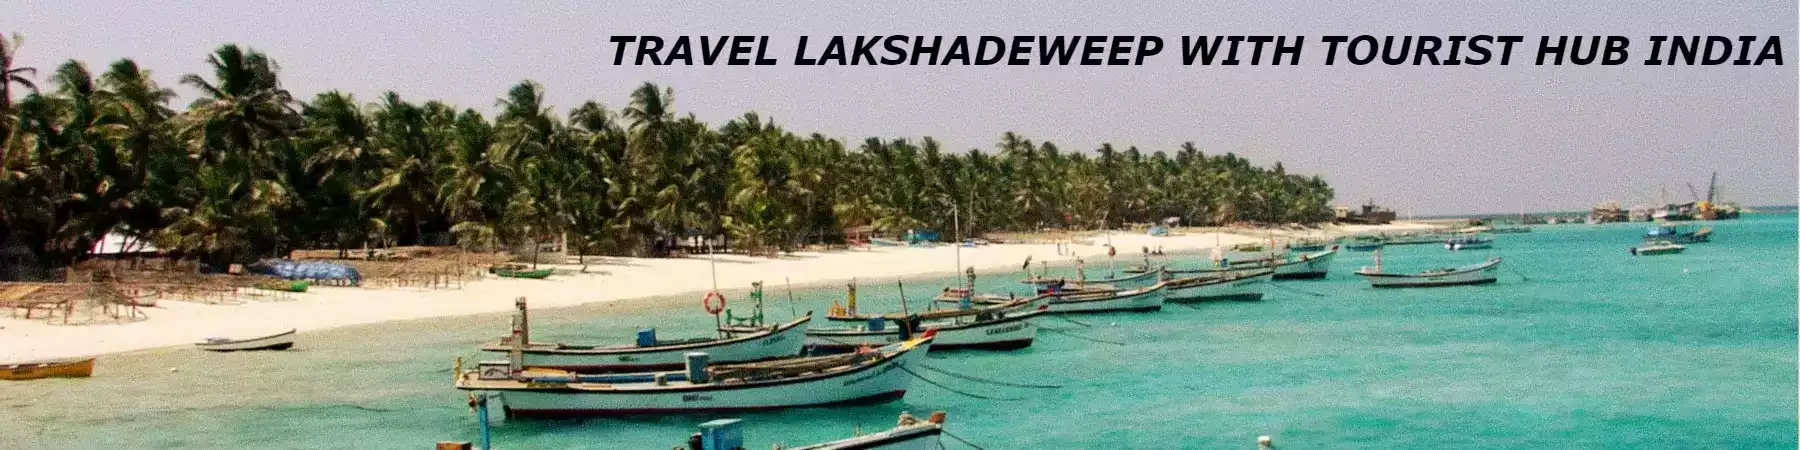 Lakshadweep holiday packages from Delhi with Tourist Hub India - The Best Lakshadweep Travel Agency